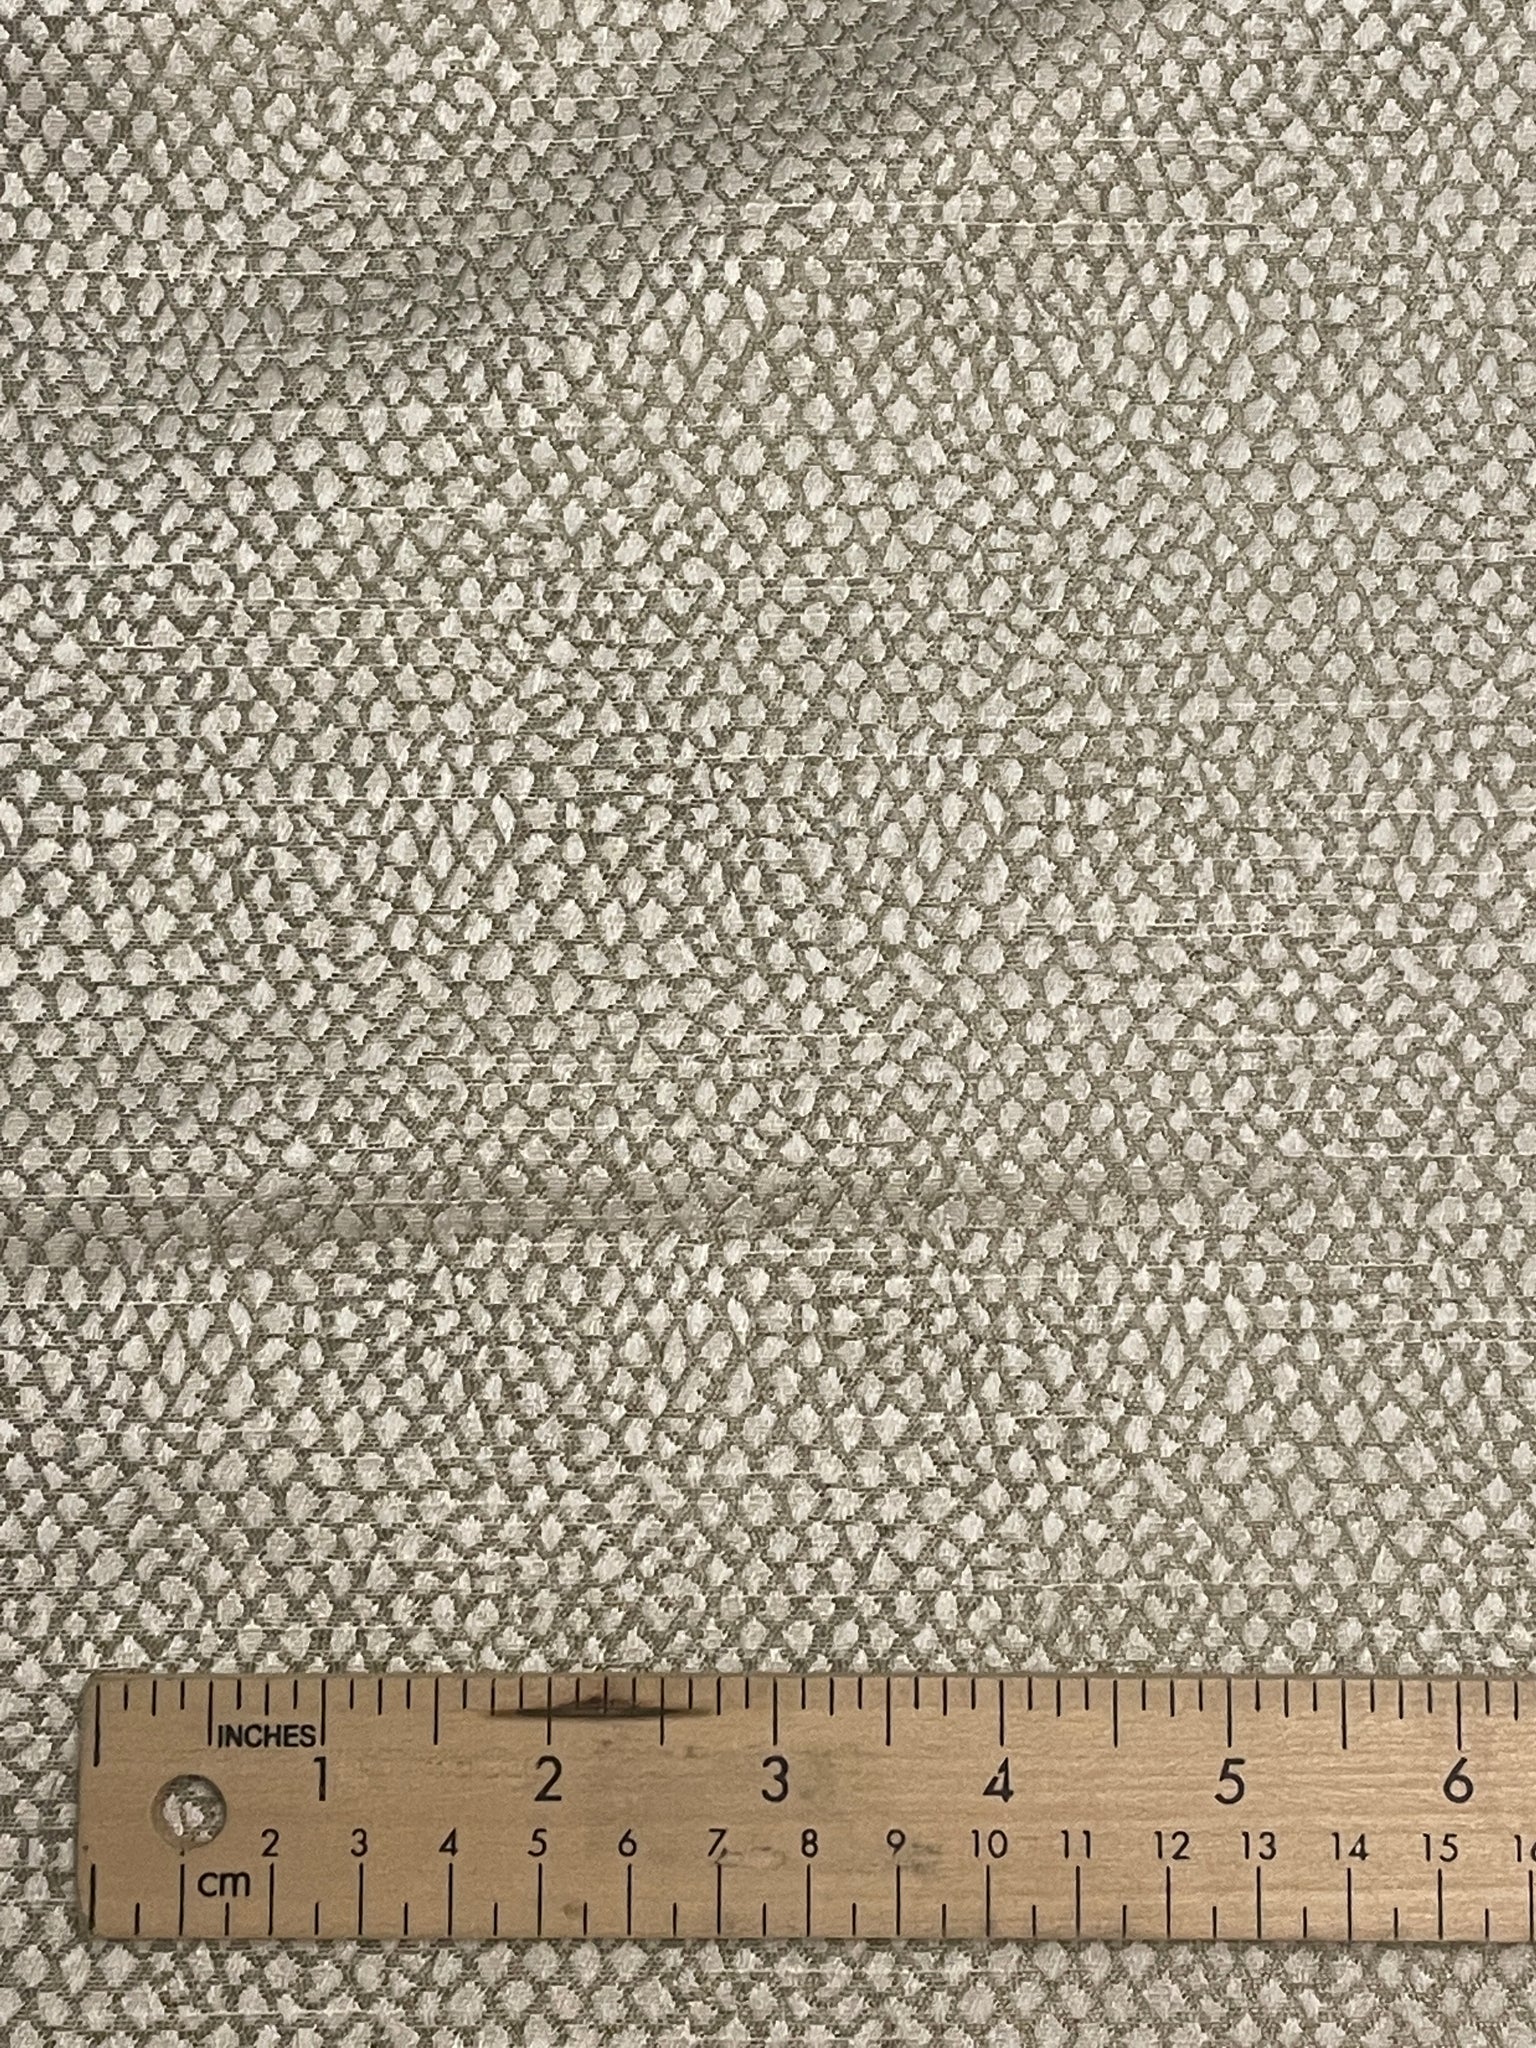 SALE 1 1/2 YD Polyester Blend Home Dec. - Off White and Gray Pebbles